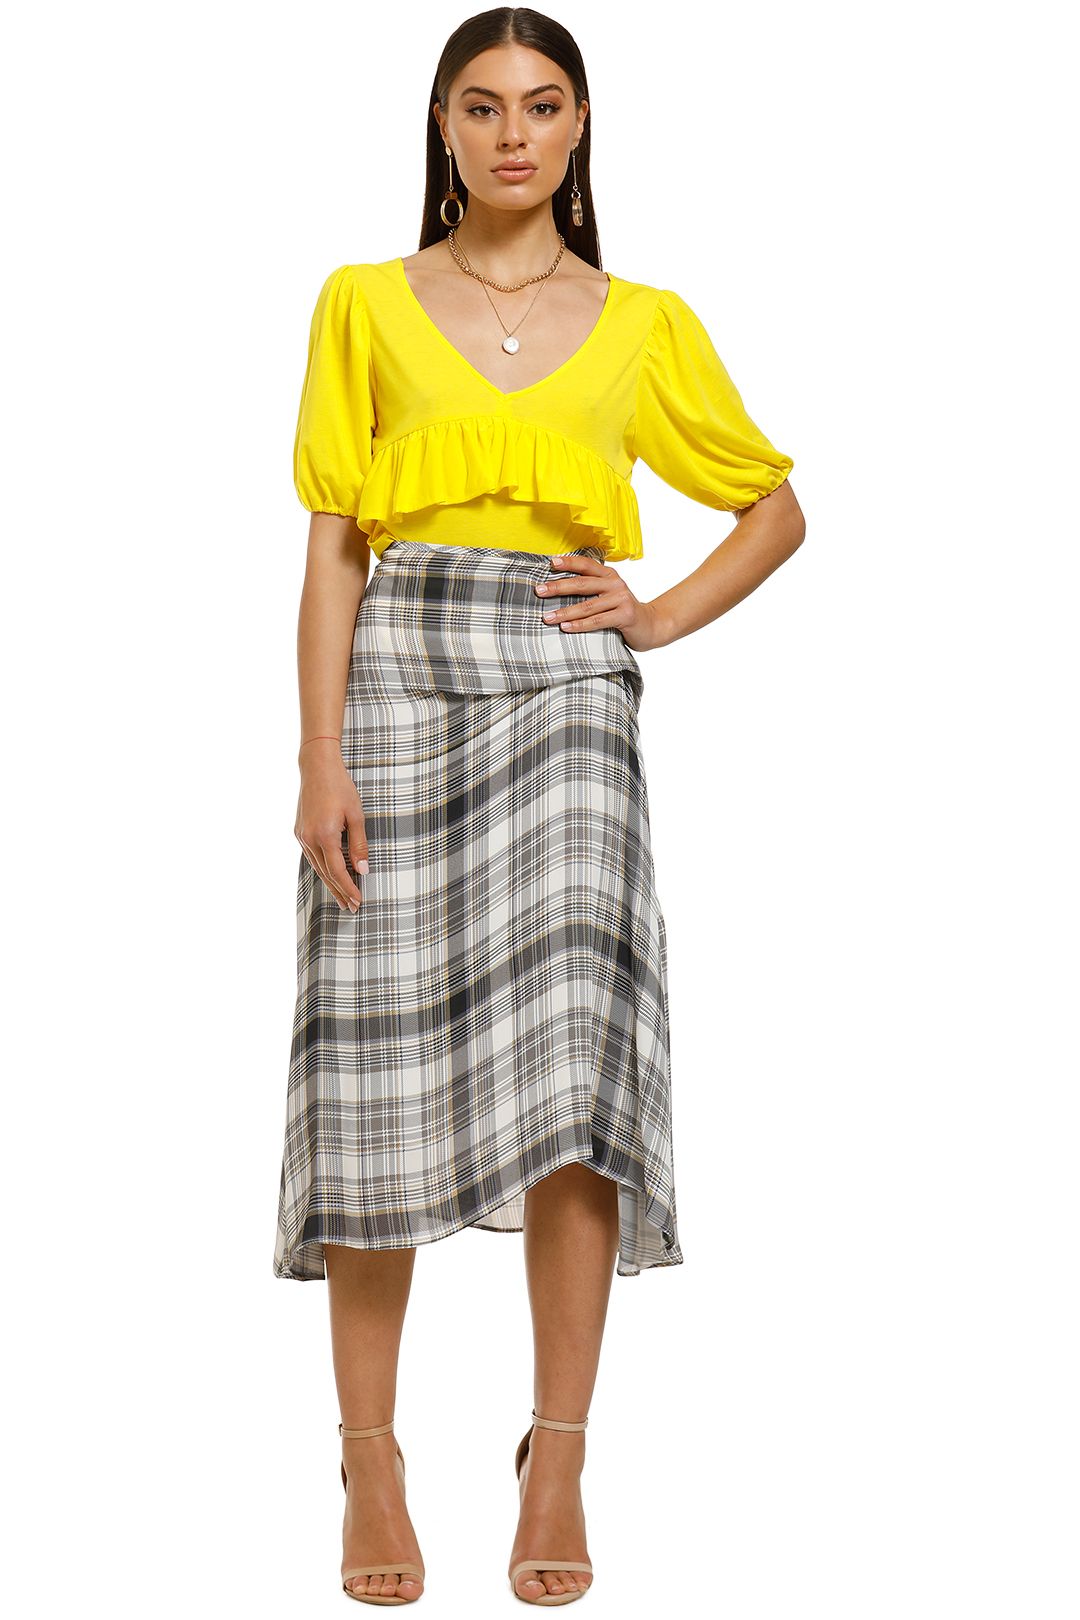 FWRD-The-Label-Rafi-Skirt-Spring-Plaid-Front